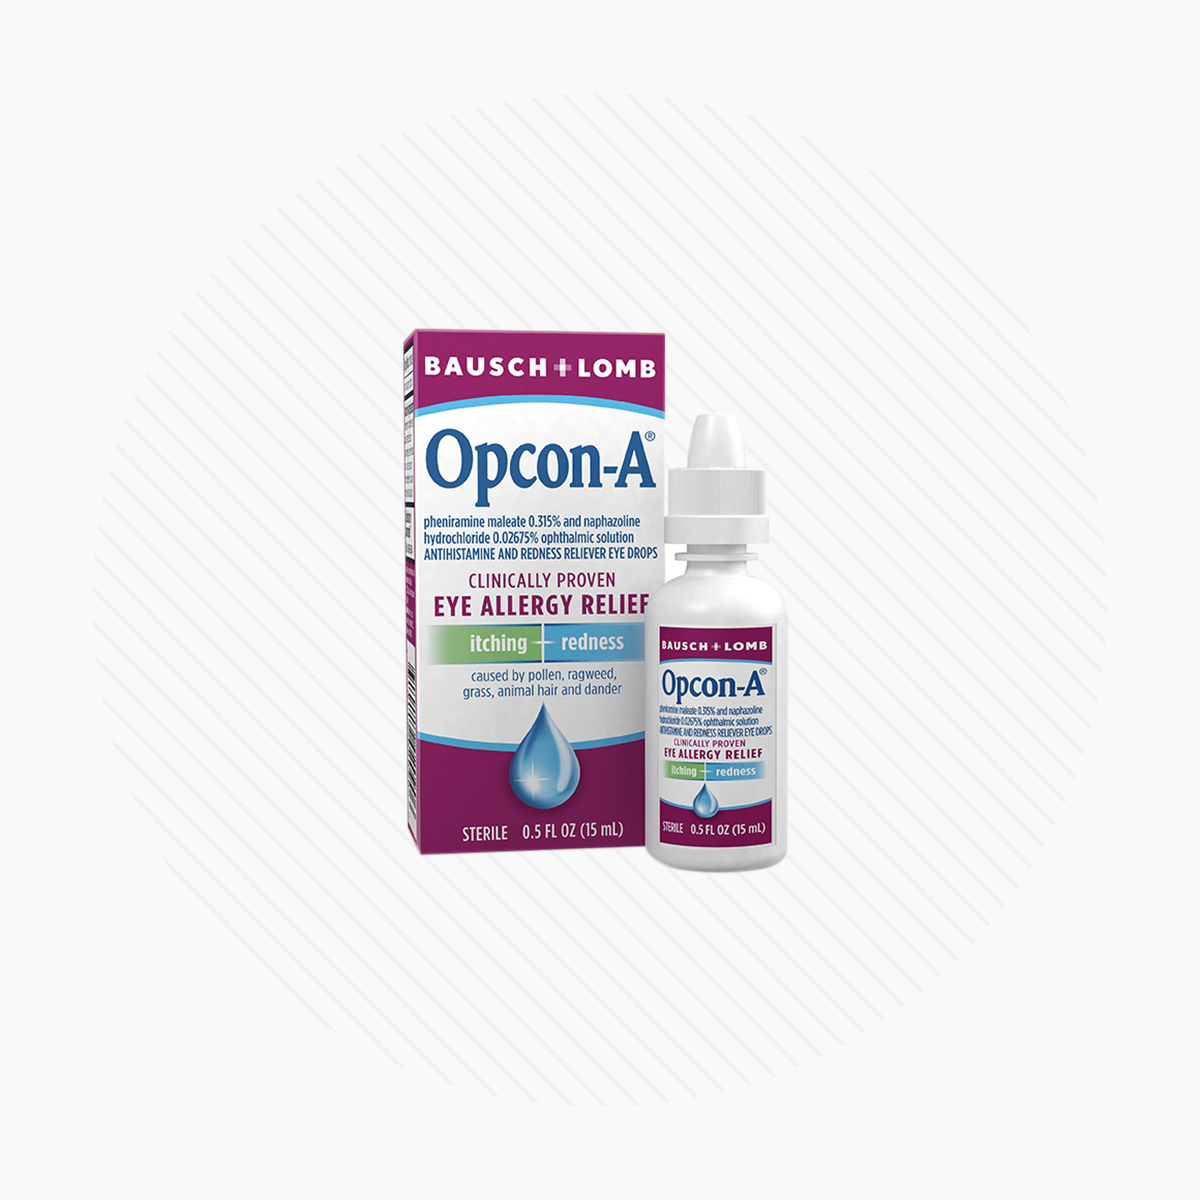 Bausch & Lomb Opcon-A Eye Drops for Allergy Relief 15mL - Dryeye Rescue